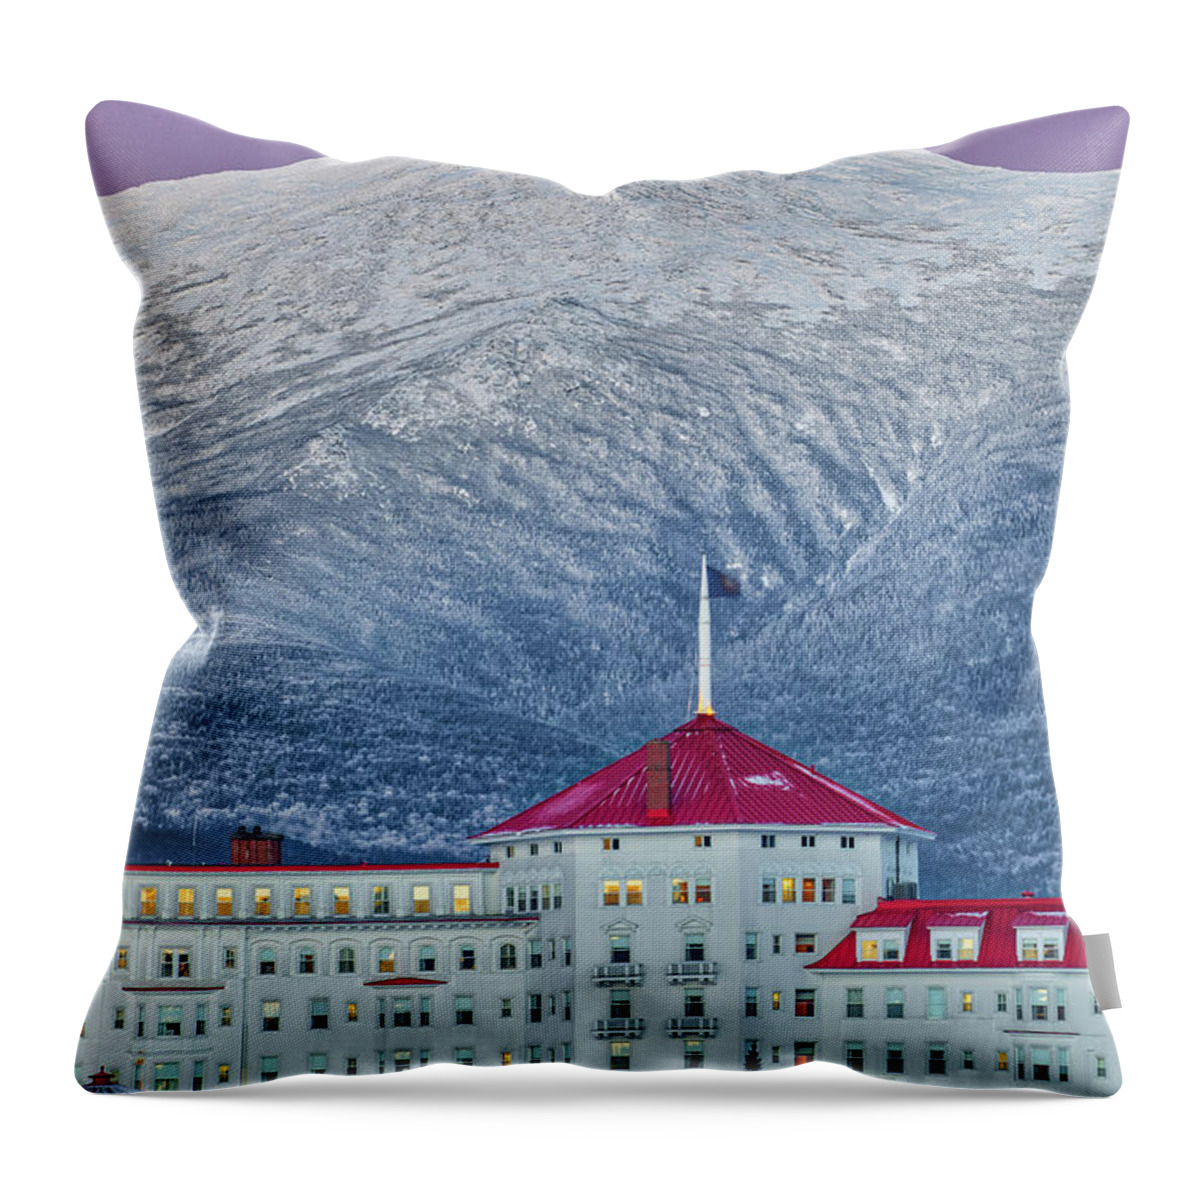 Omni Mount Washington Resort Throw Pillow featuring the photograph Omni Mount Washington Resort Hotel in Betton Woods New Hampshire by Juergen Roth